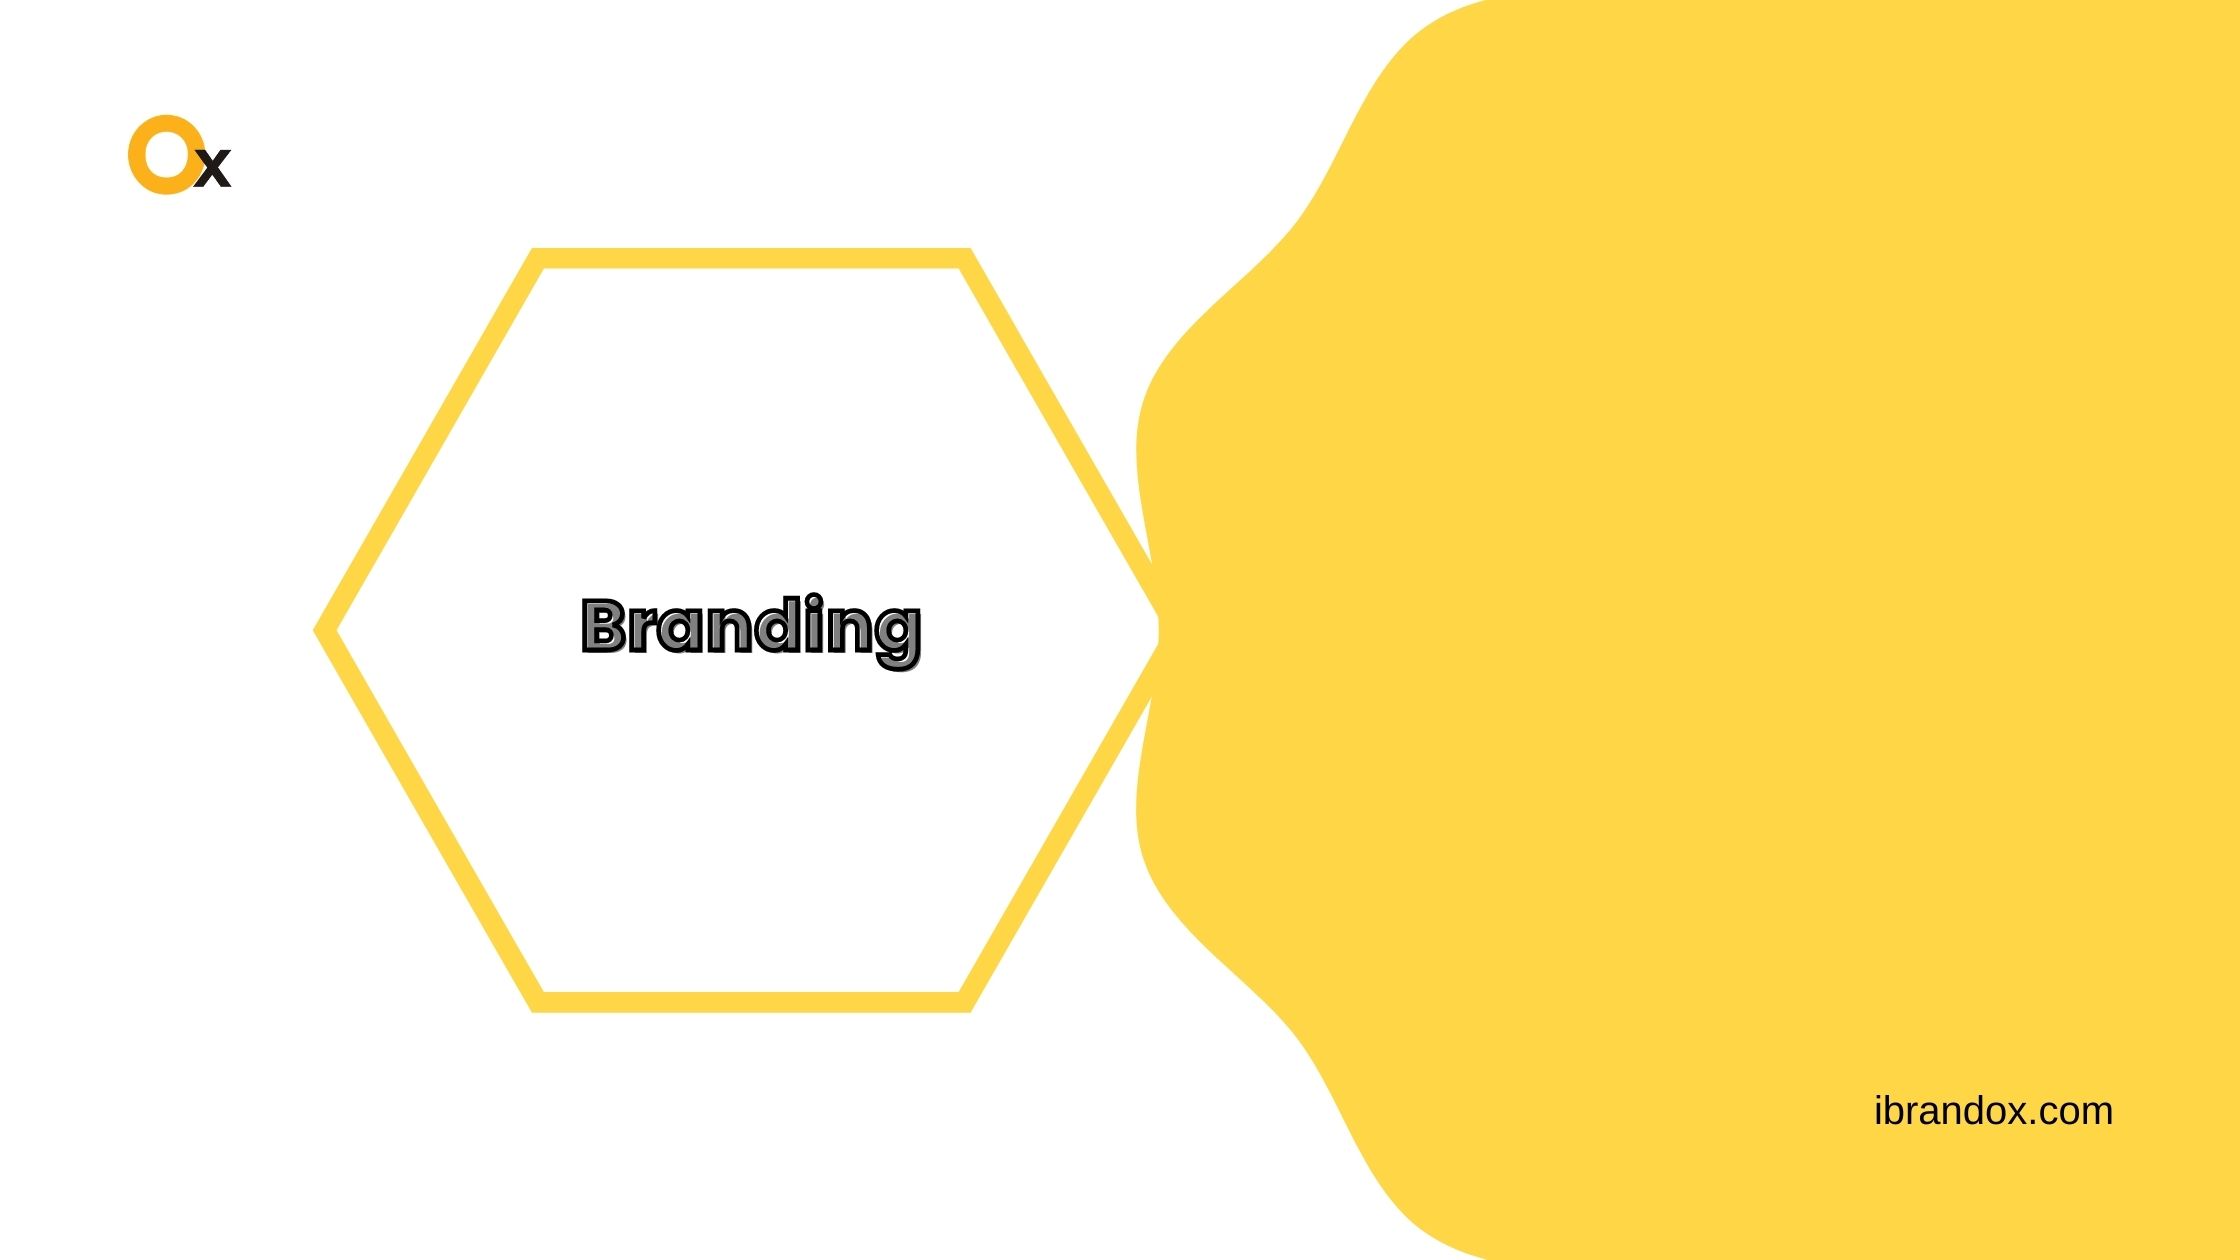 Article about The Best Branding Agency in Delhi That You Should Be Aware Of